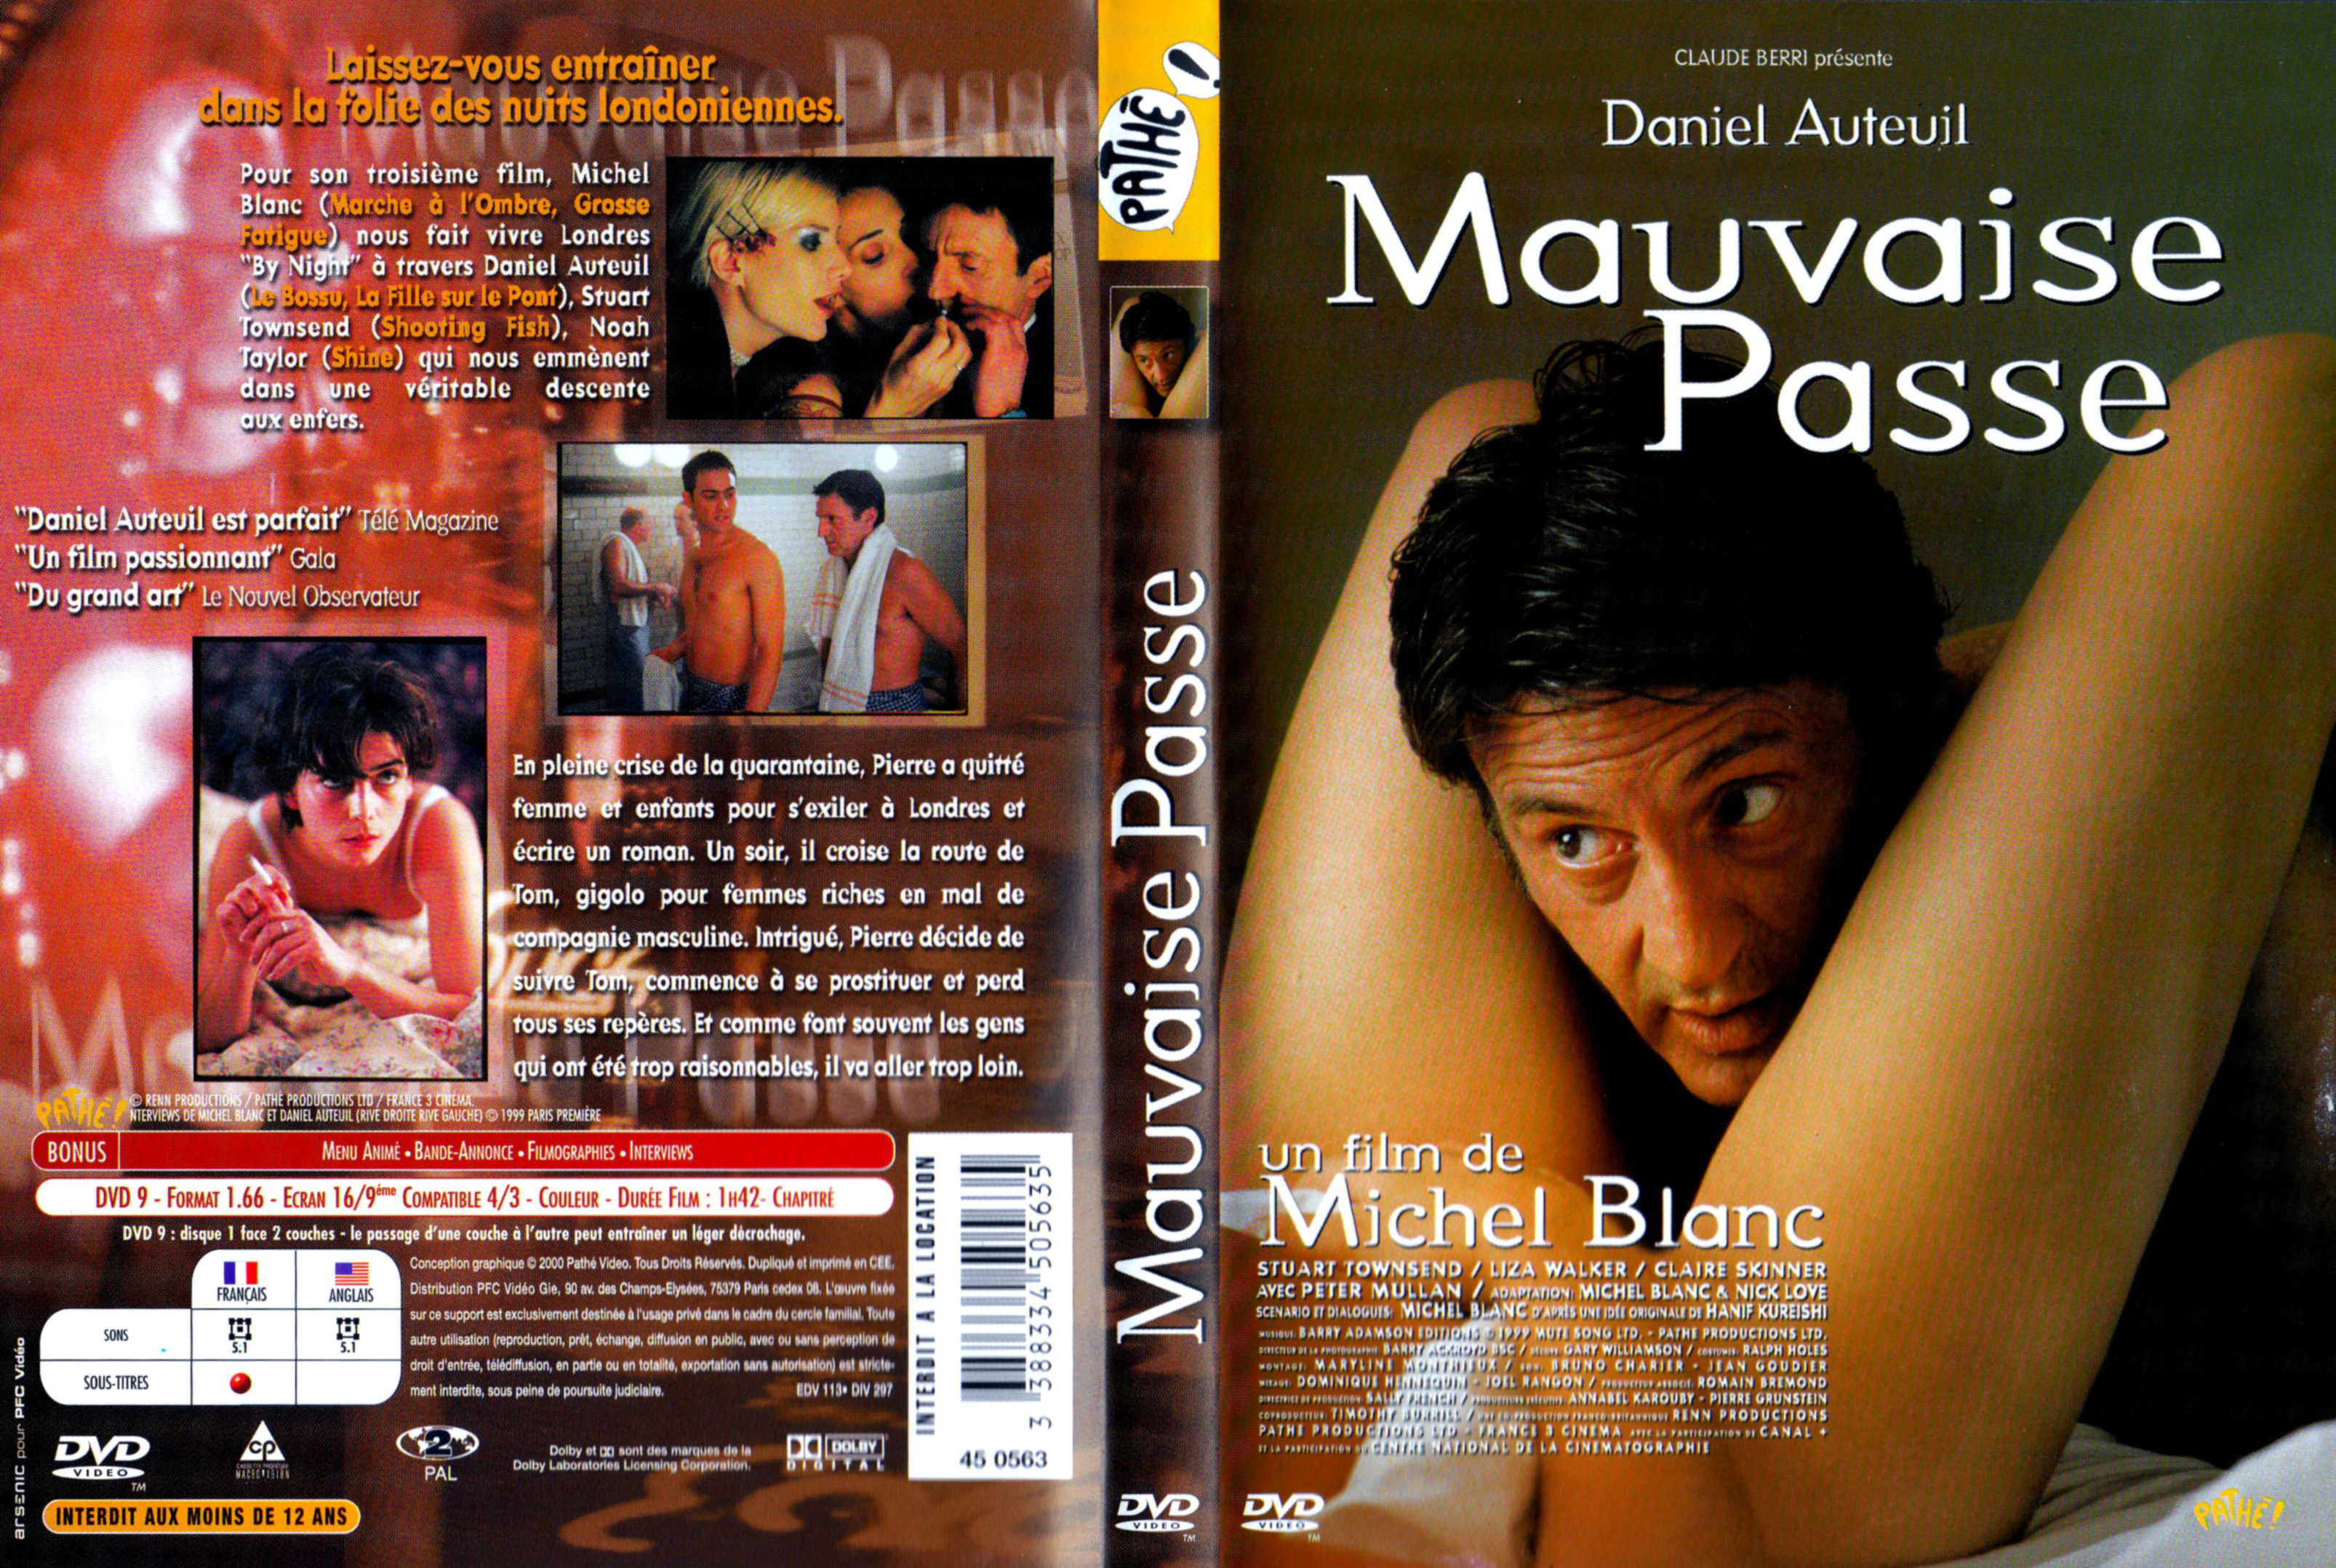 Jaquette DVD Mauvaise passe